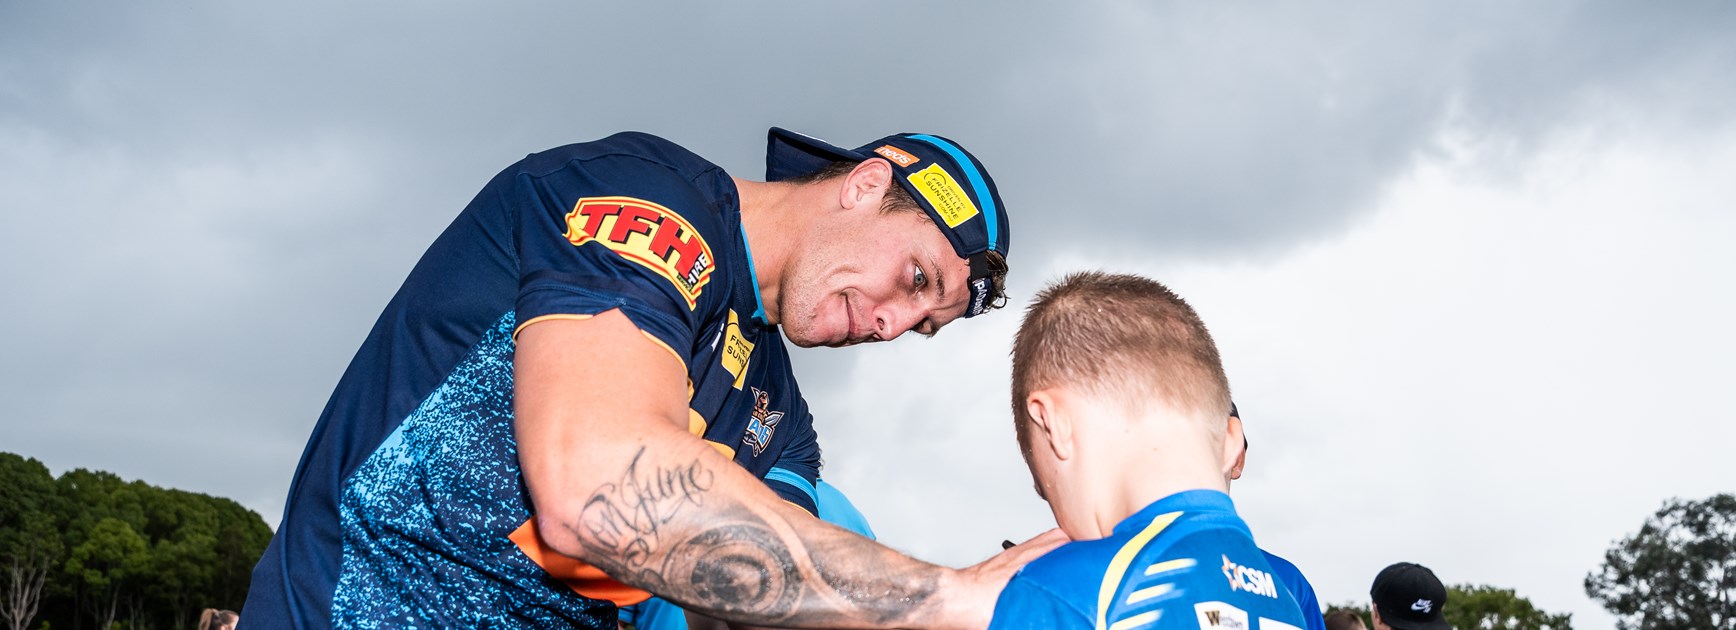 Titans School Holiday Clinic is Back at an Iconic Gold Coast Location